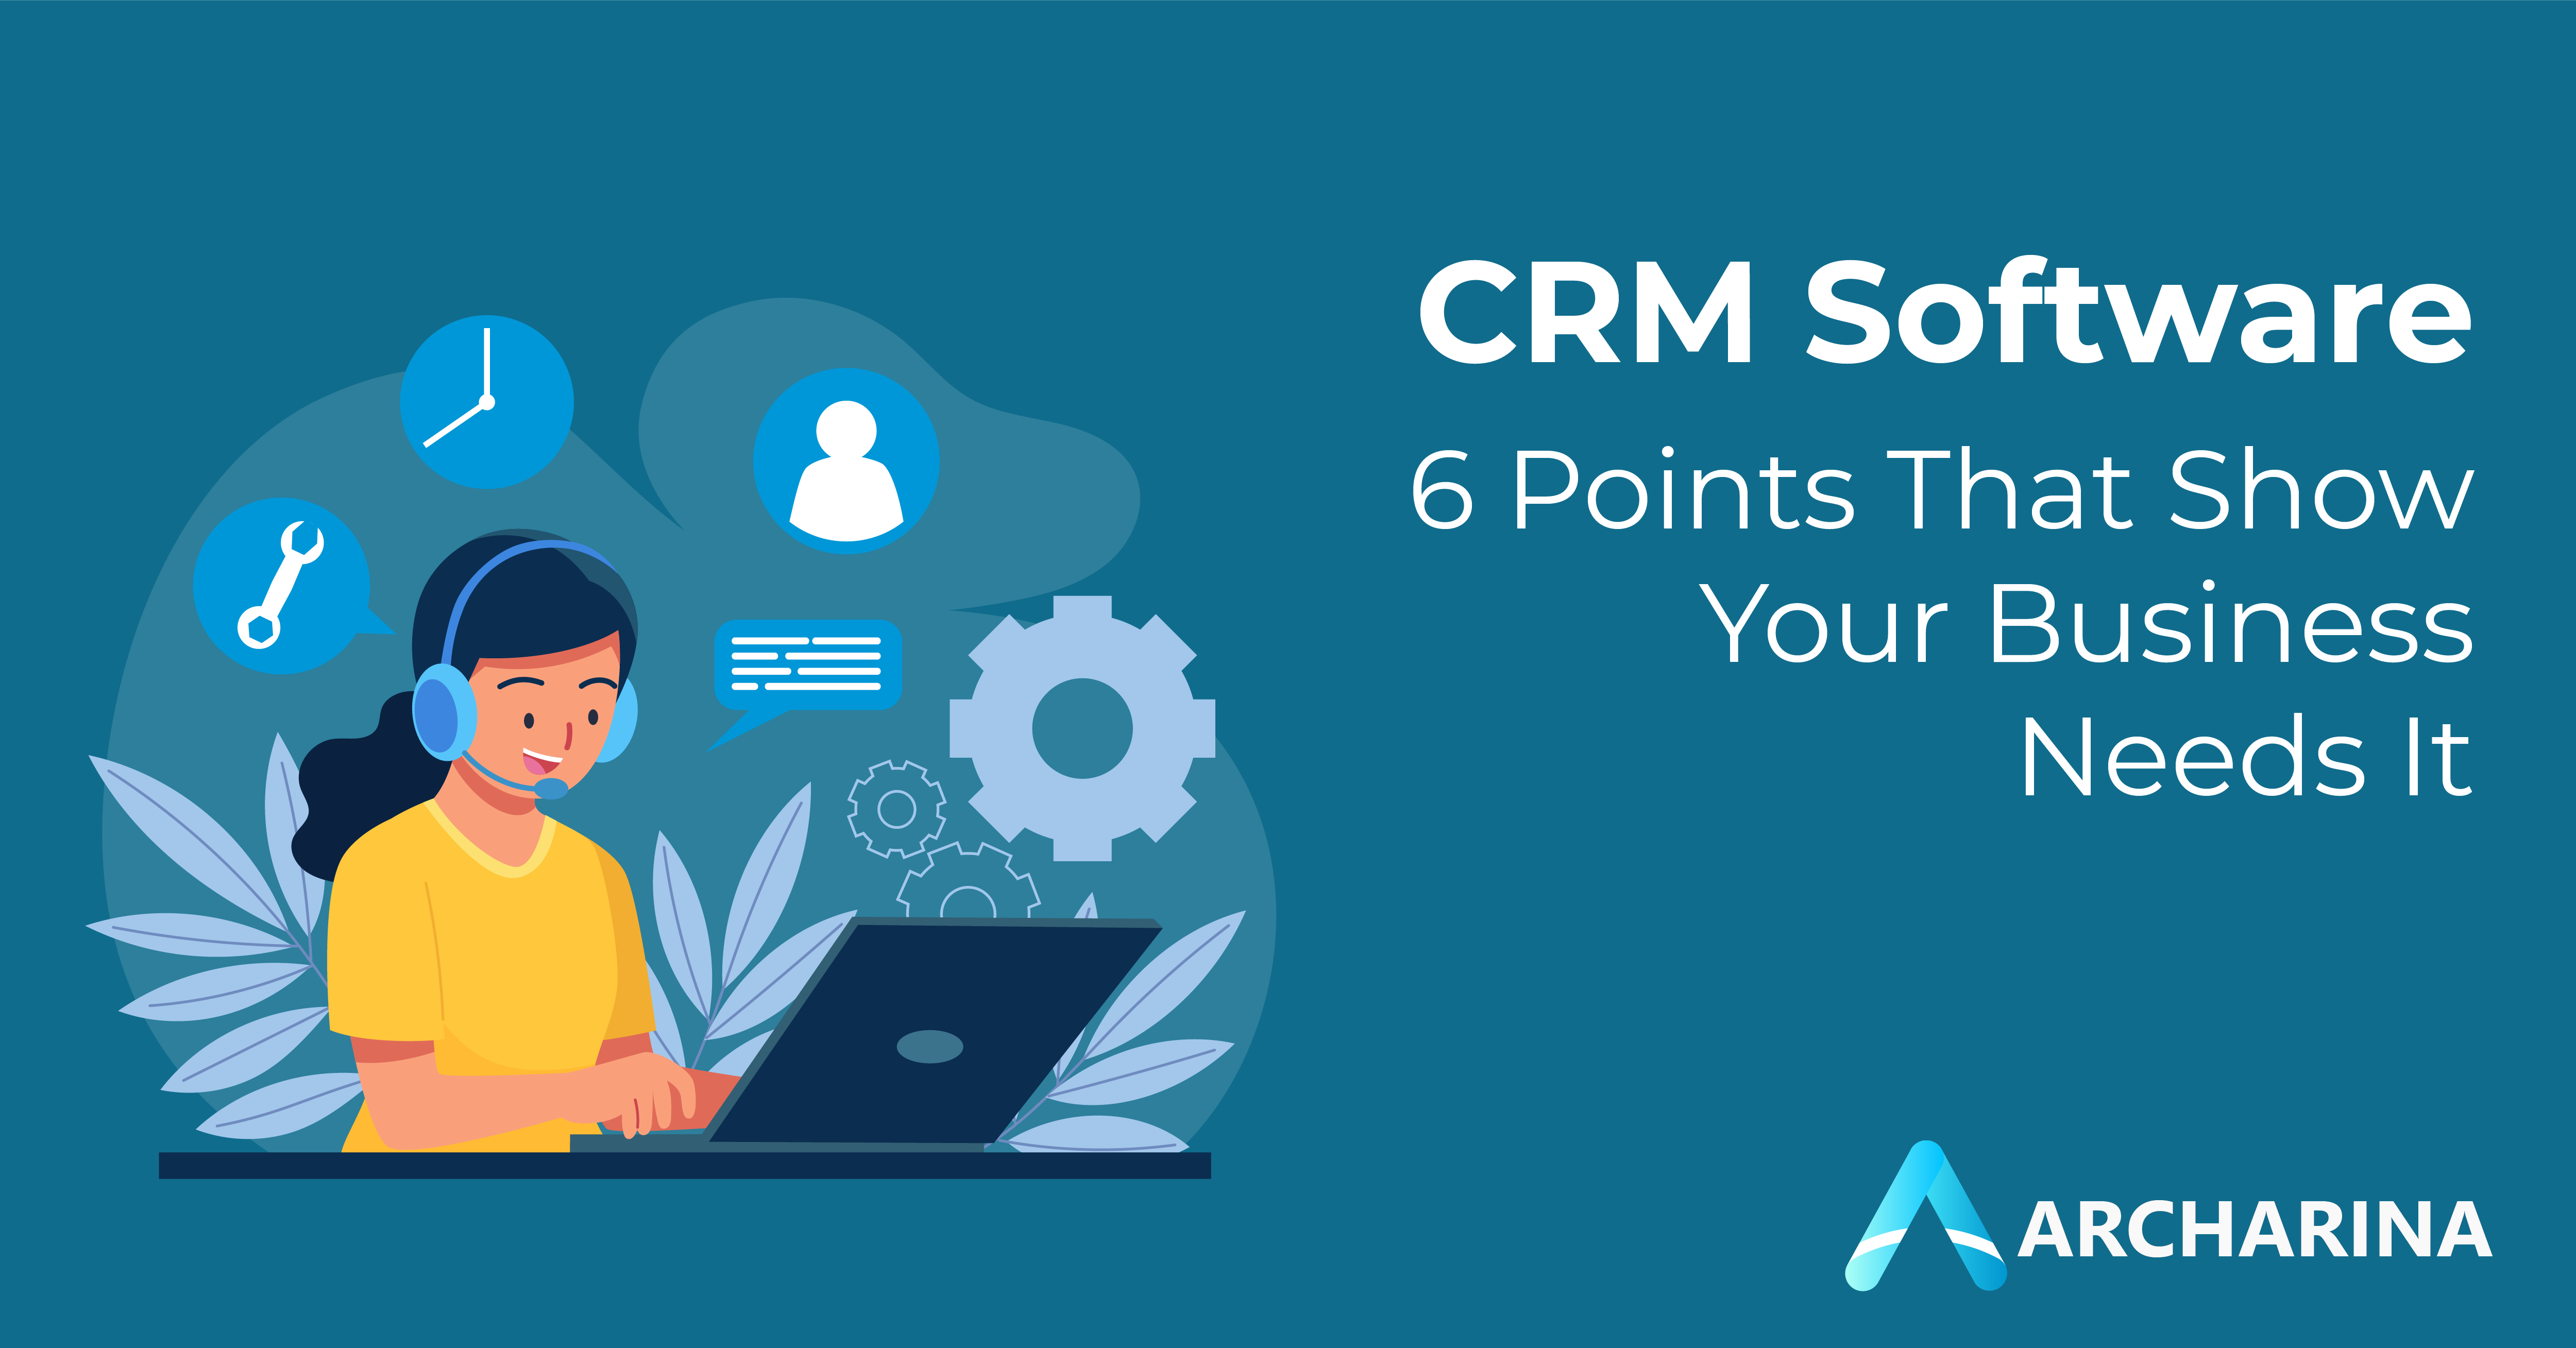 CRM Software: 6 Points That Show Your Business Needs It